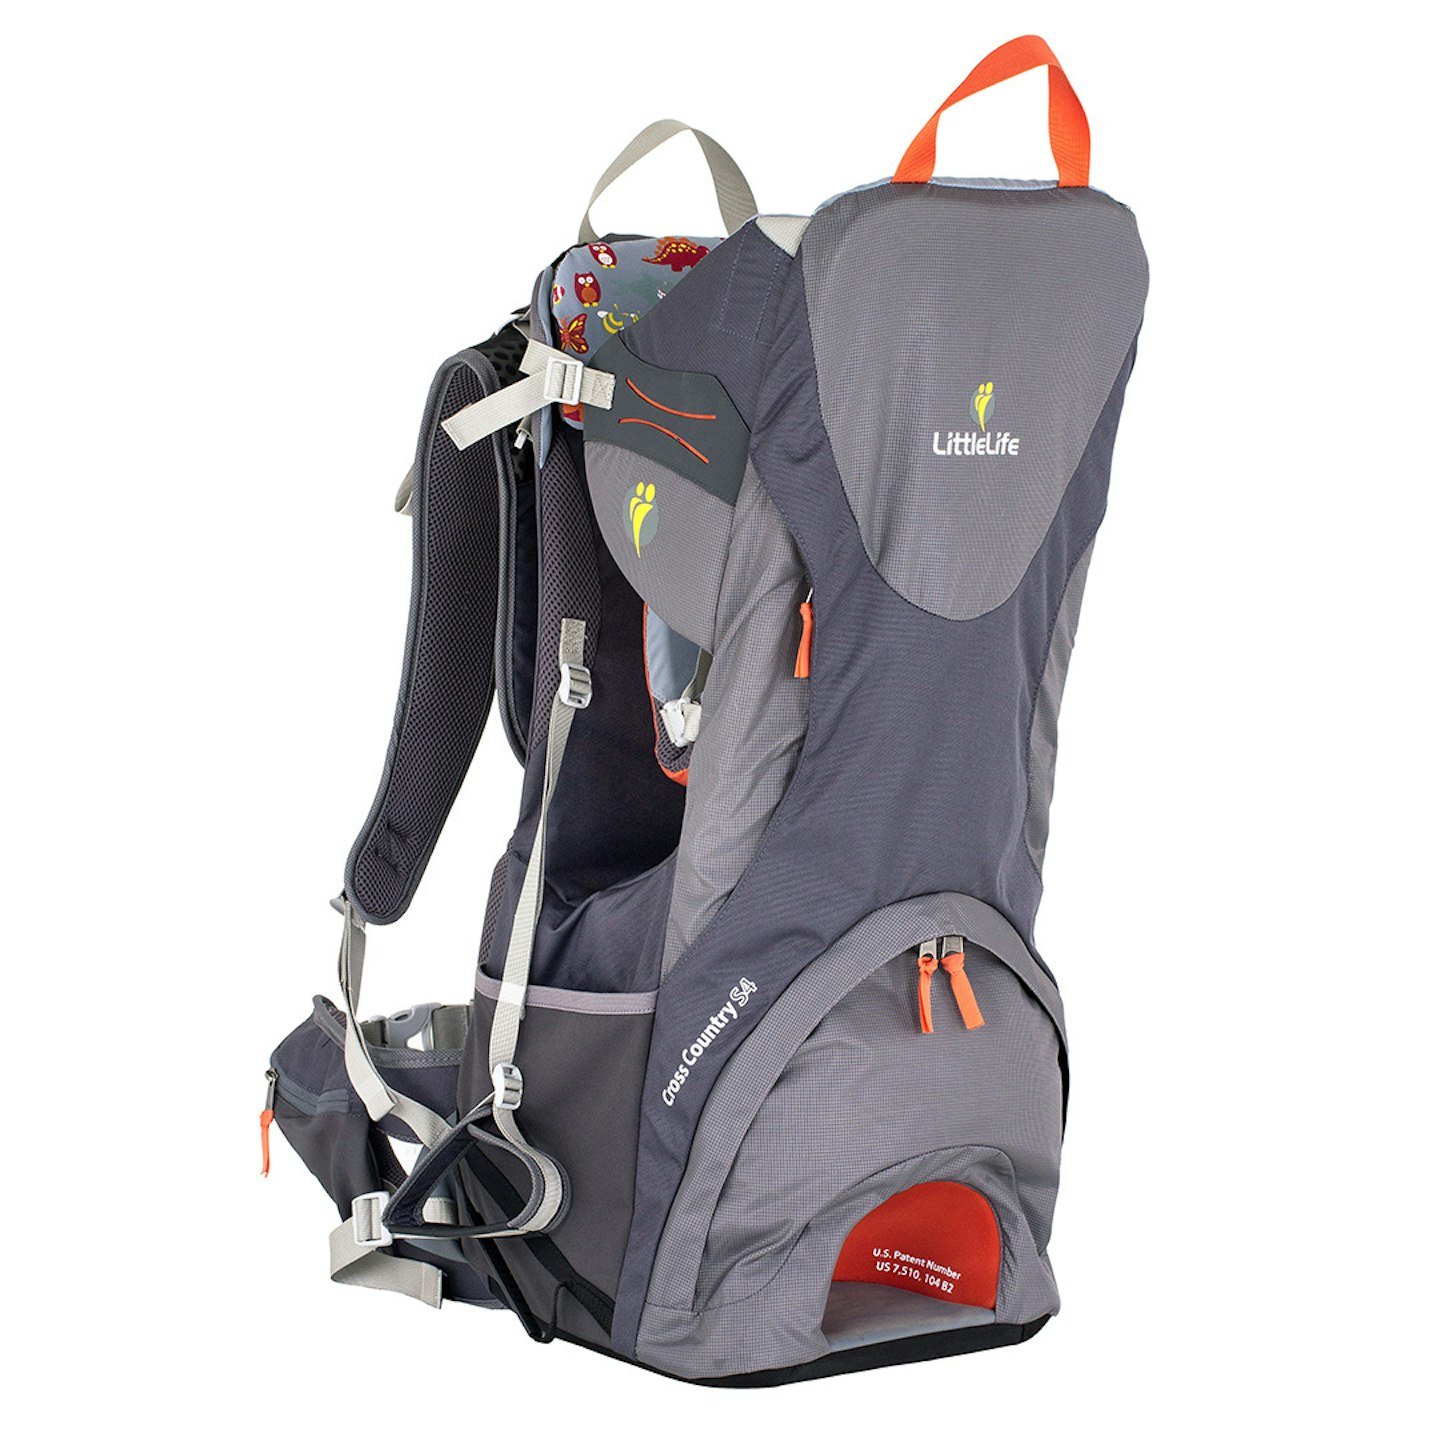 Cross Country S4 Child Carrier